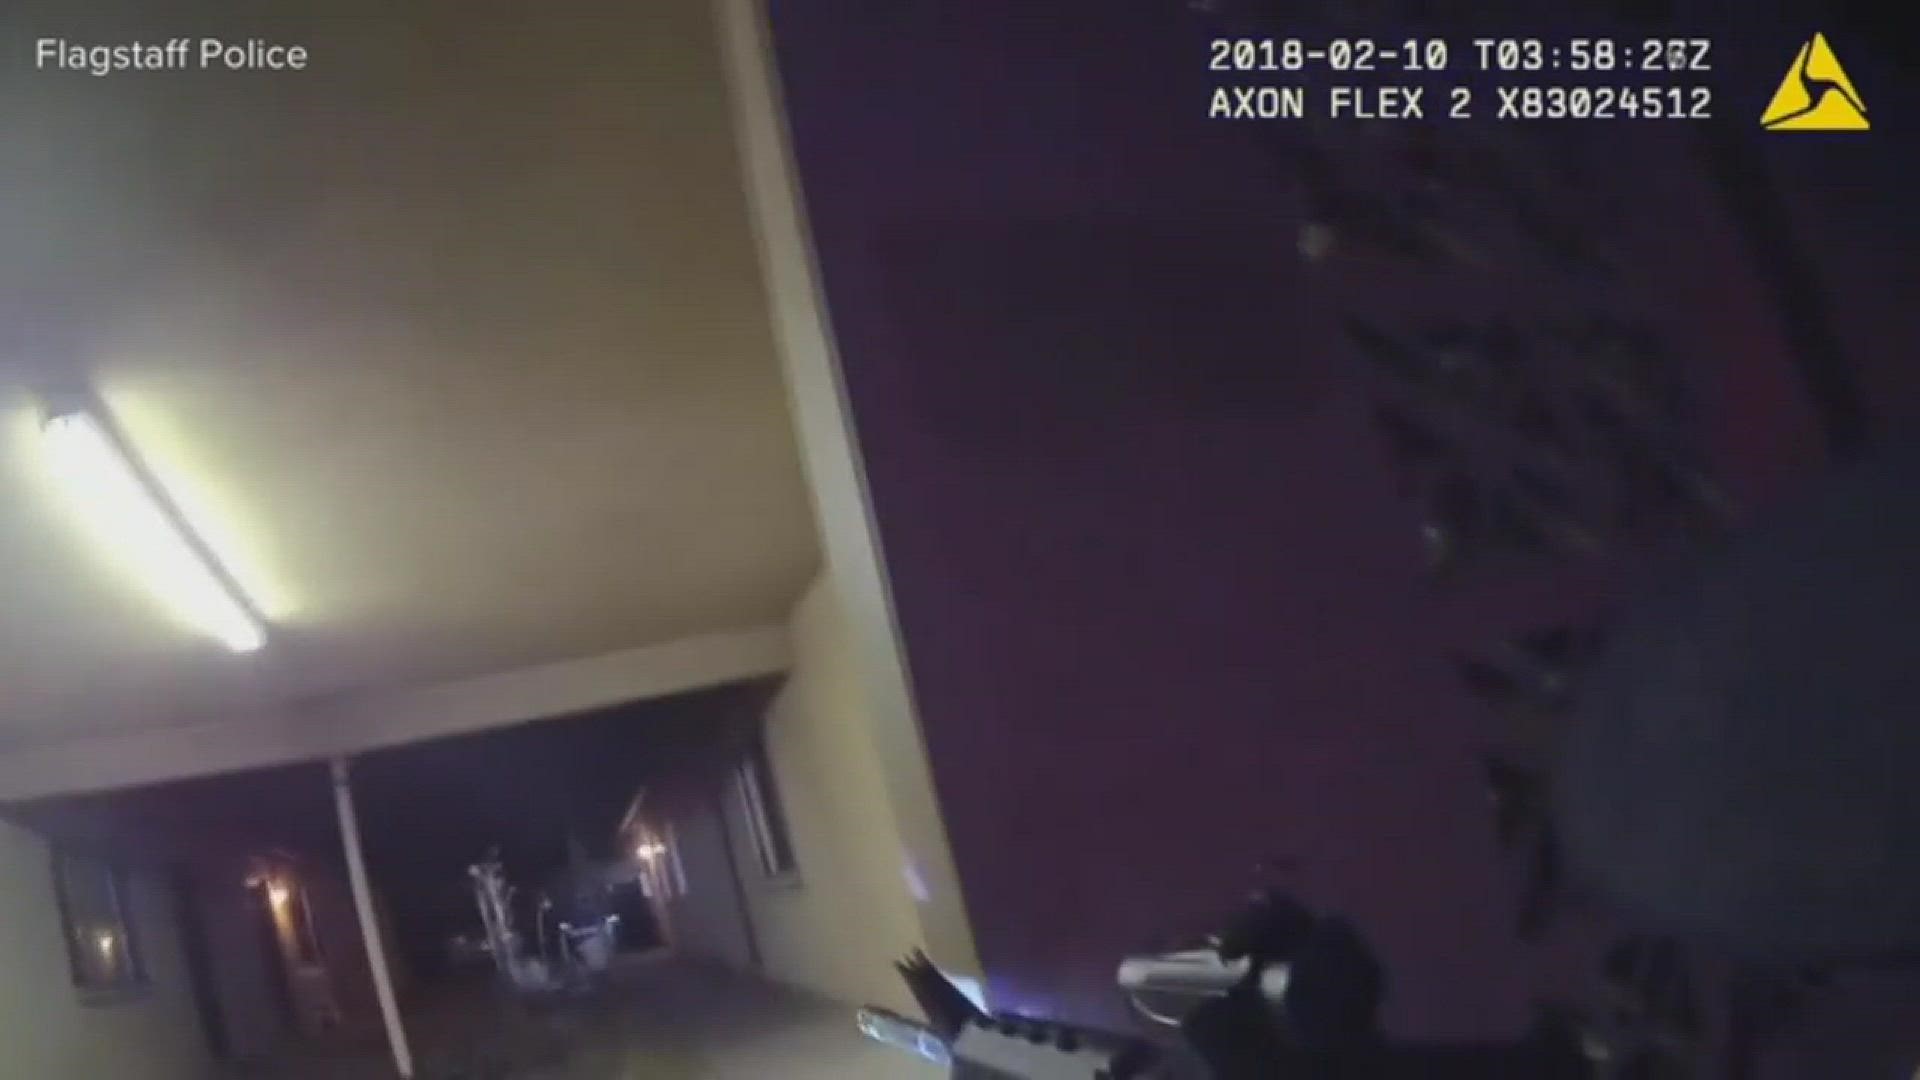 Flagstaff police have released body camera footage of an officer-involved shooting in which a man was killed last week.